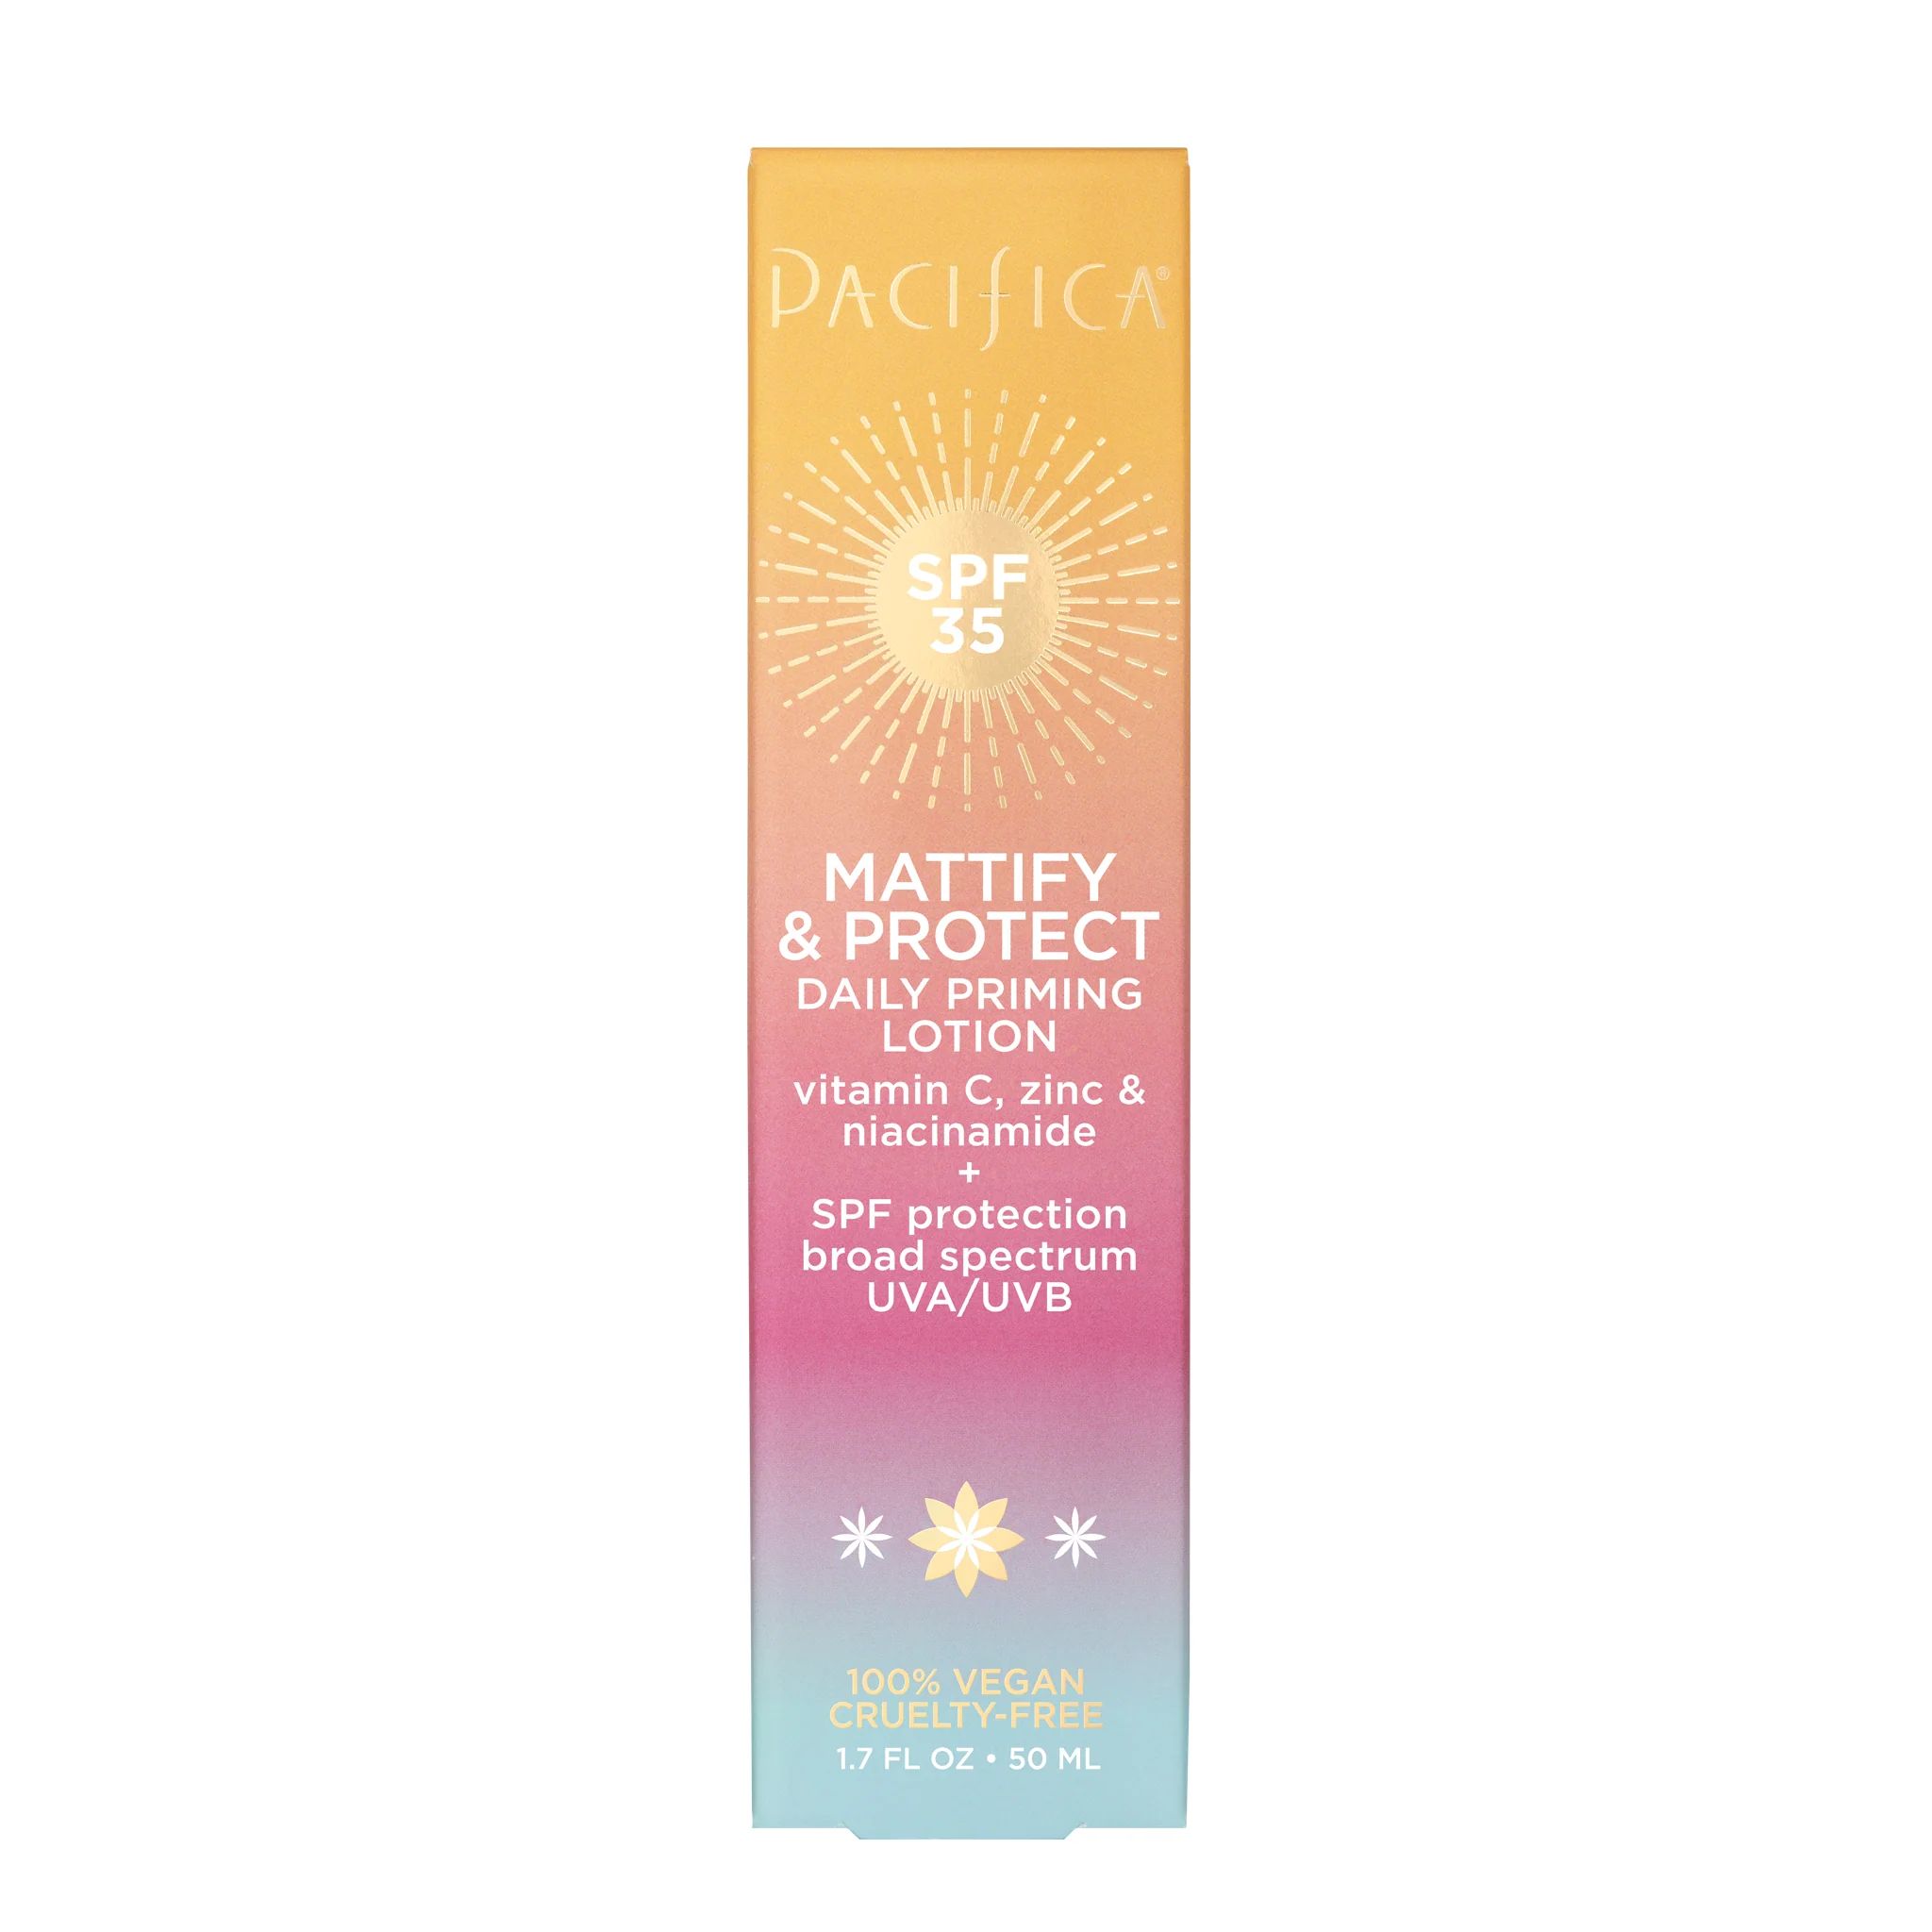 Sea & C Mattify & Protect Daily Priming Lotion SPF 35 | Pacifica Beauty